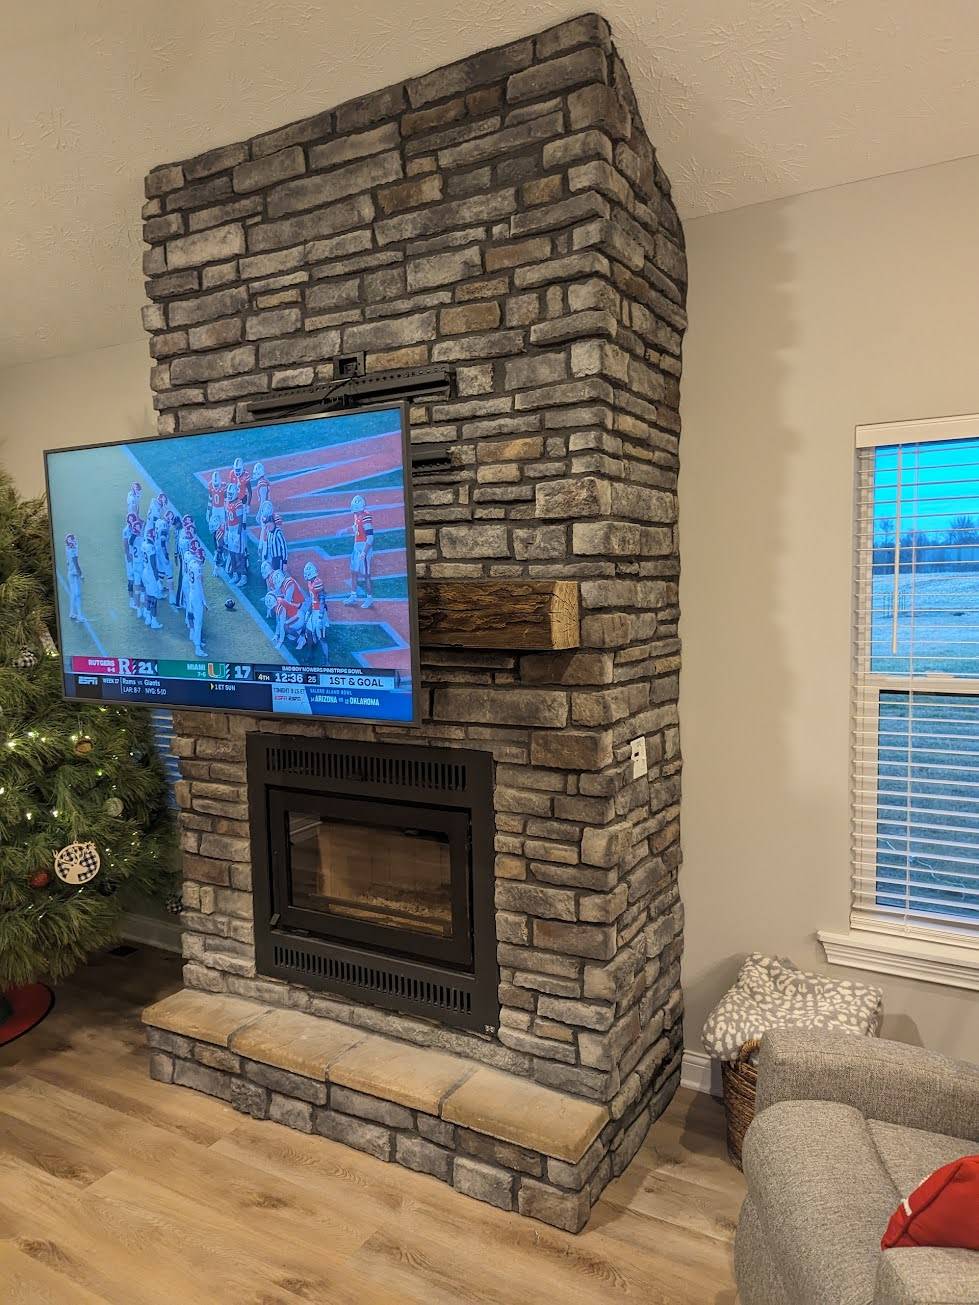 Expert TV installation on an irregular stone fireplace in Louisville, KY, featuring a complex pull-down Mantelmount, overcoming structural challenges. | TV Mounting Louisville Kentucky